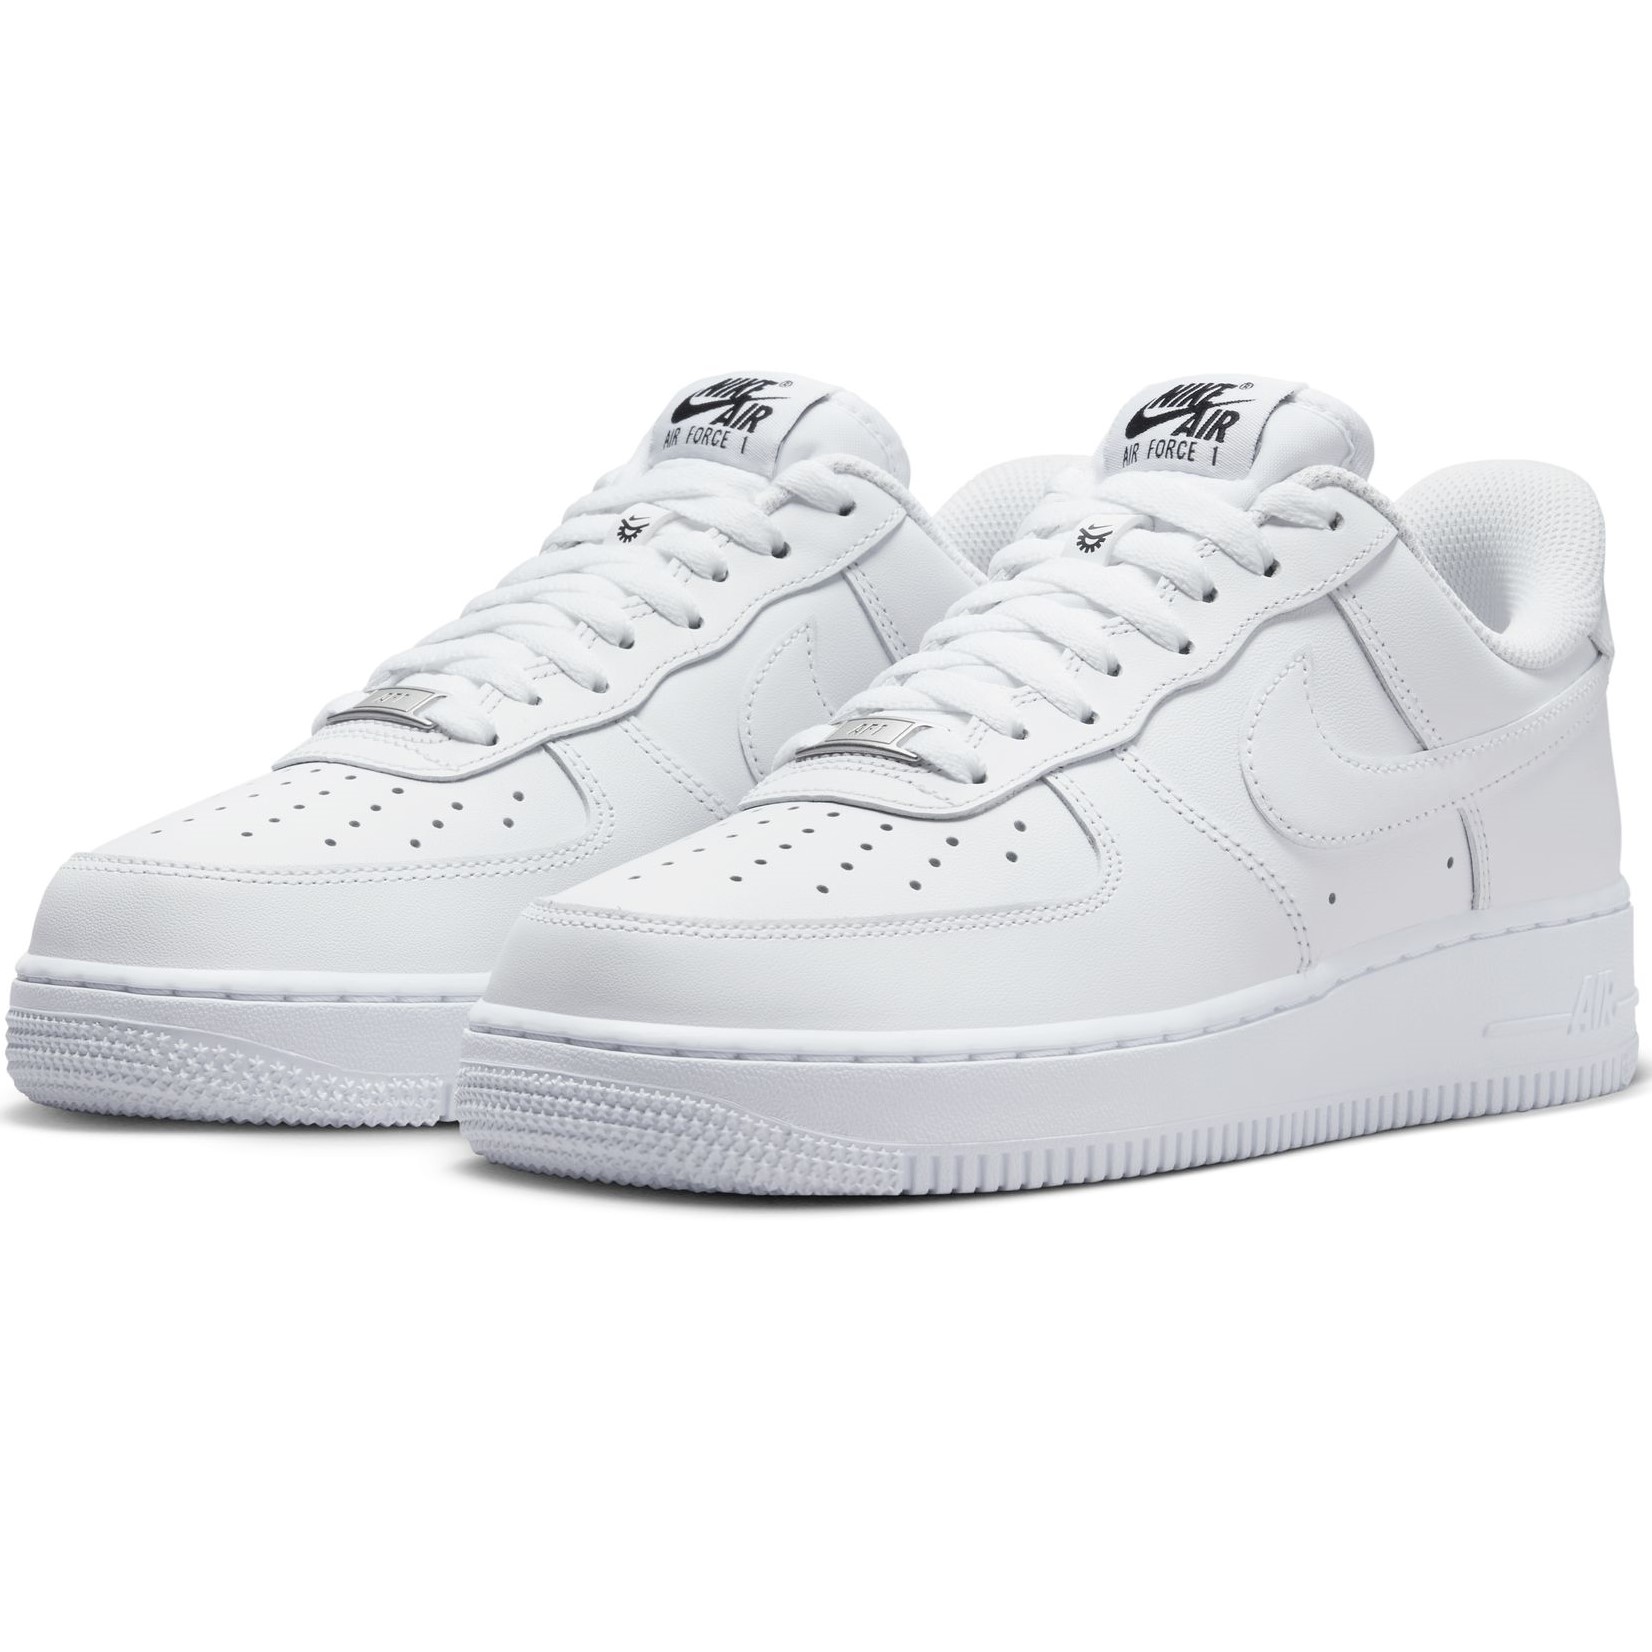 GIÀY THỂ THAO NỮ NIKE AIR FORCE 1 07 EASYON WHITE WOMENS SHOES DX5883-100 1